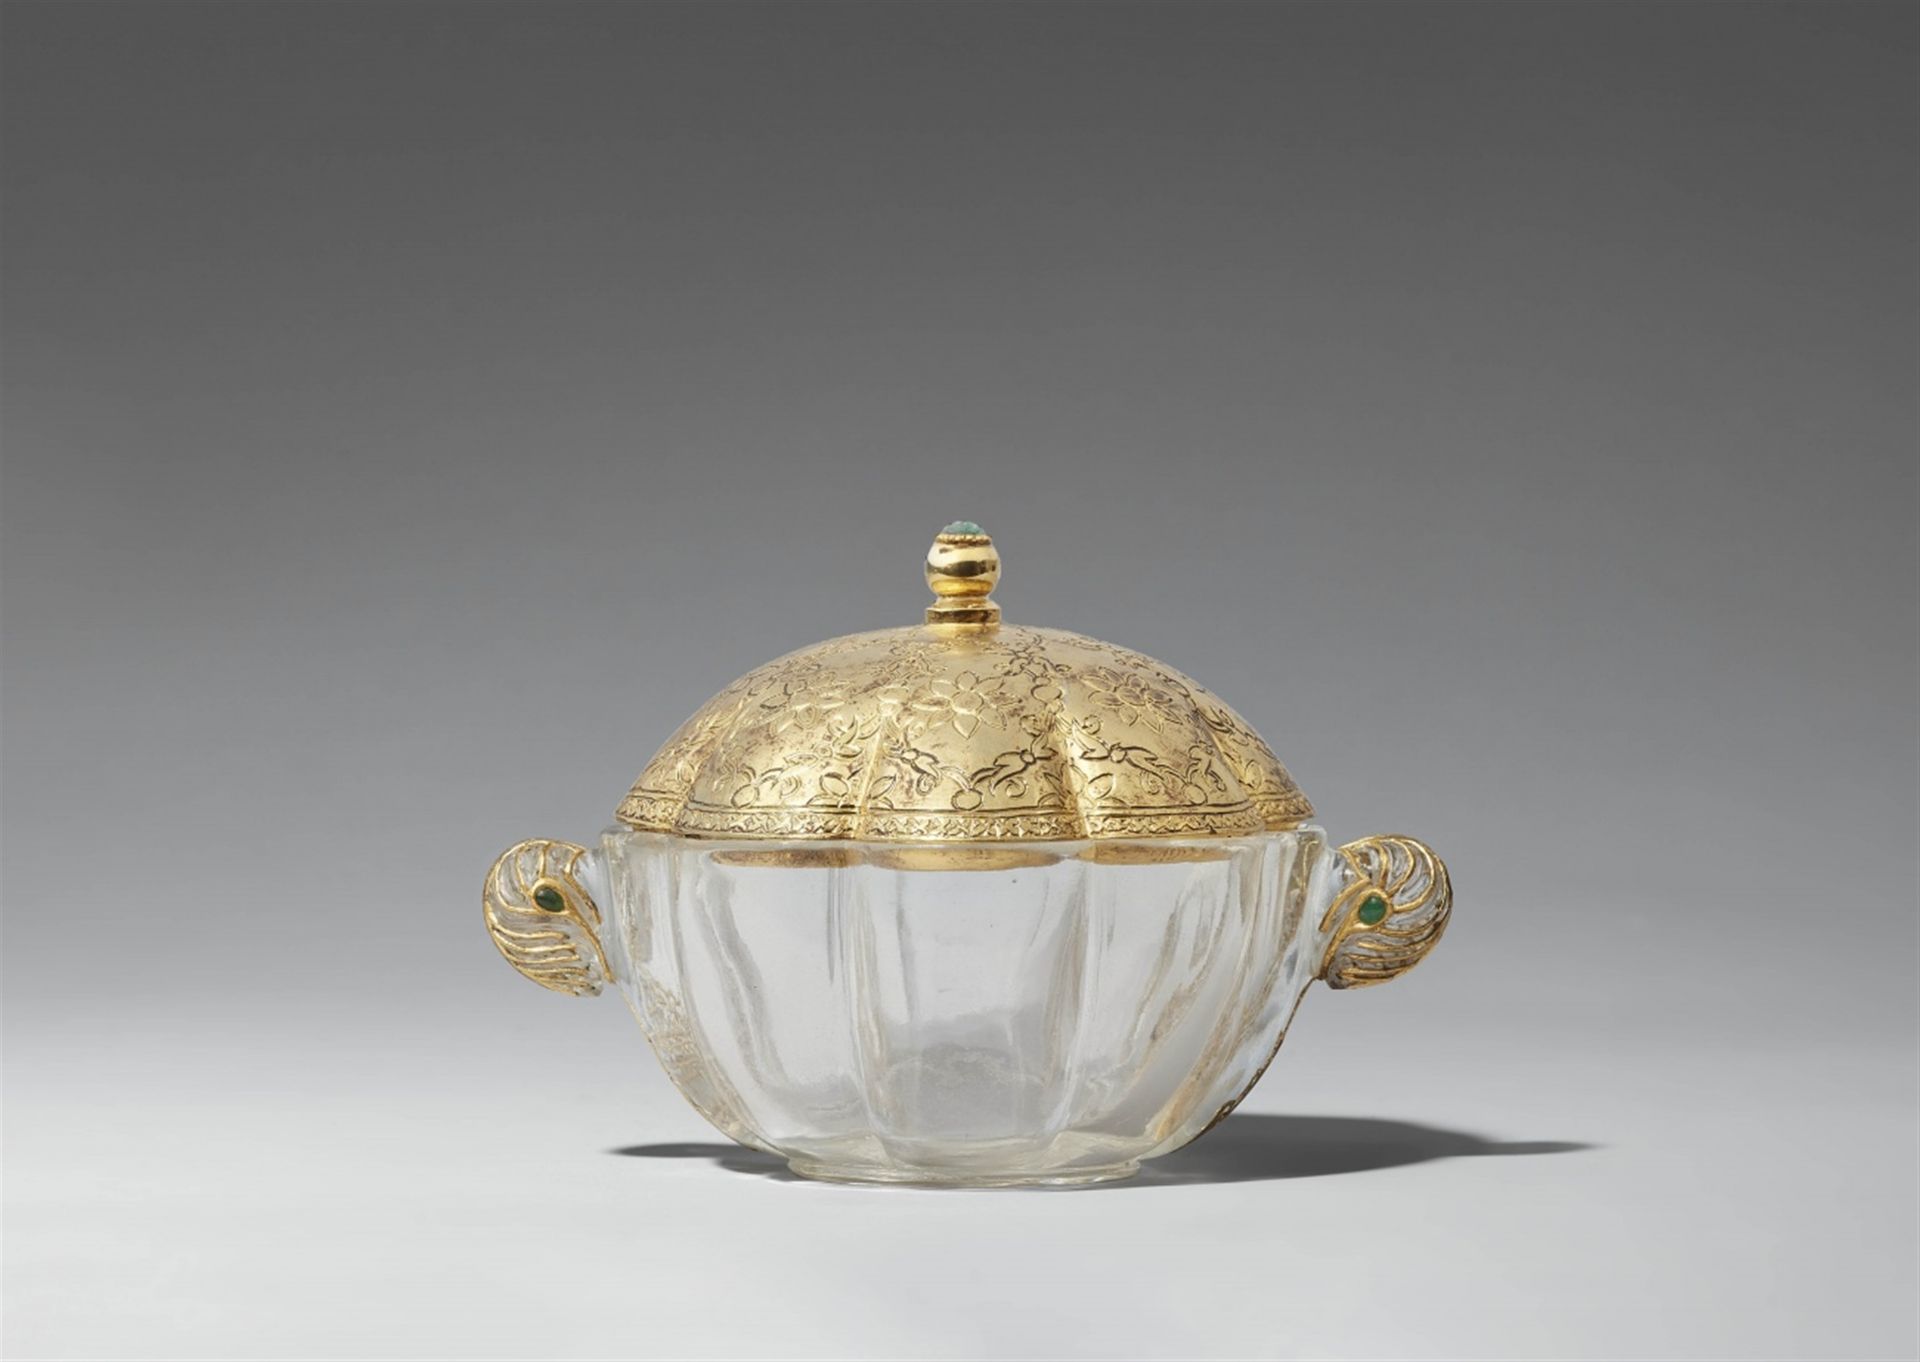 A North or Central Indian rock crystal bowl with a gilt metal lid